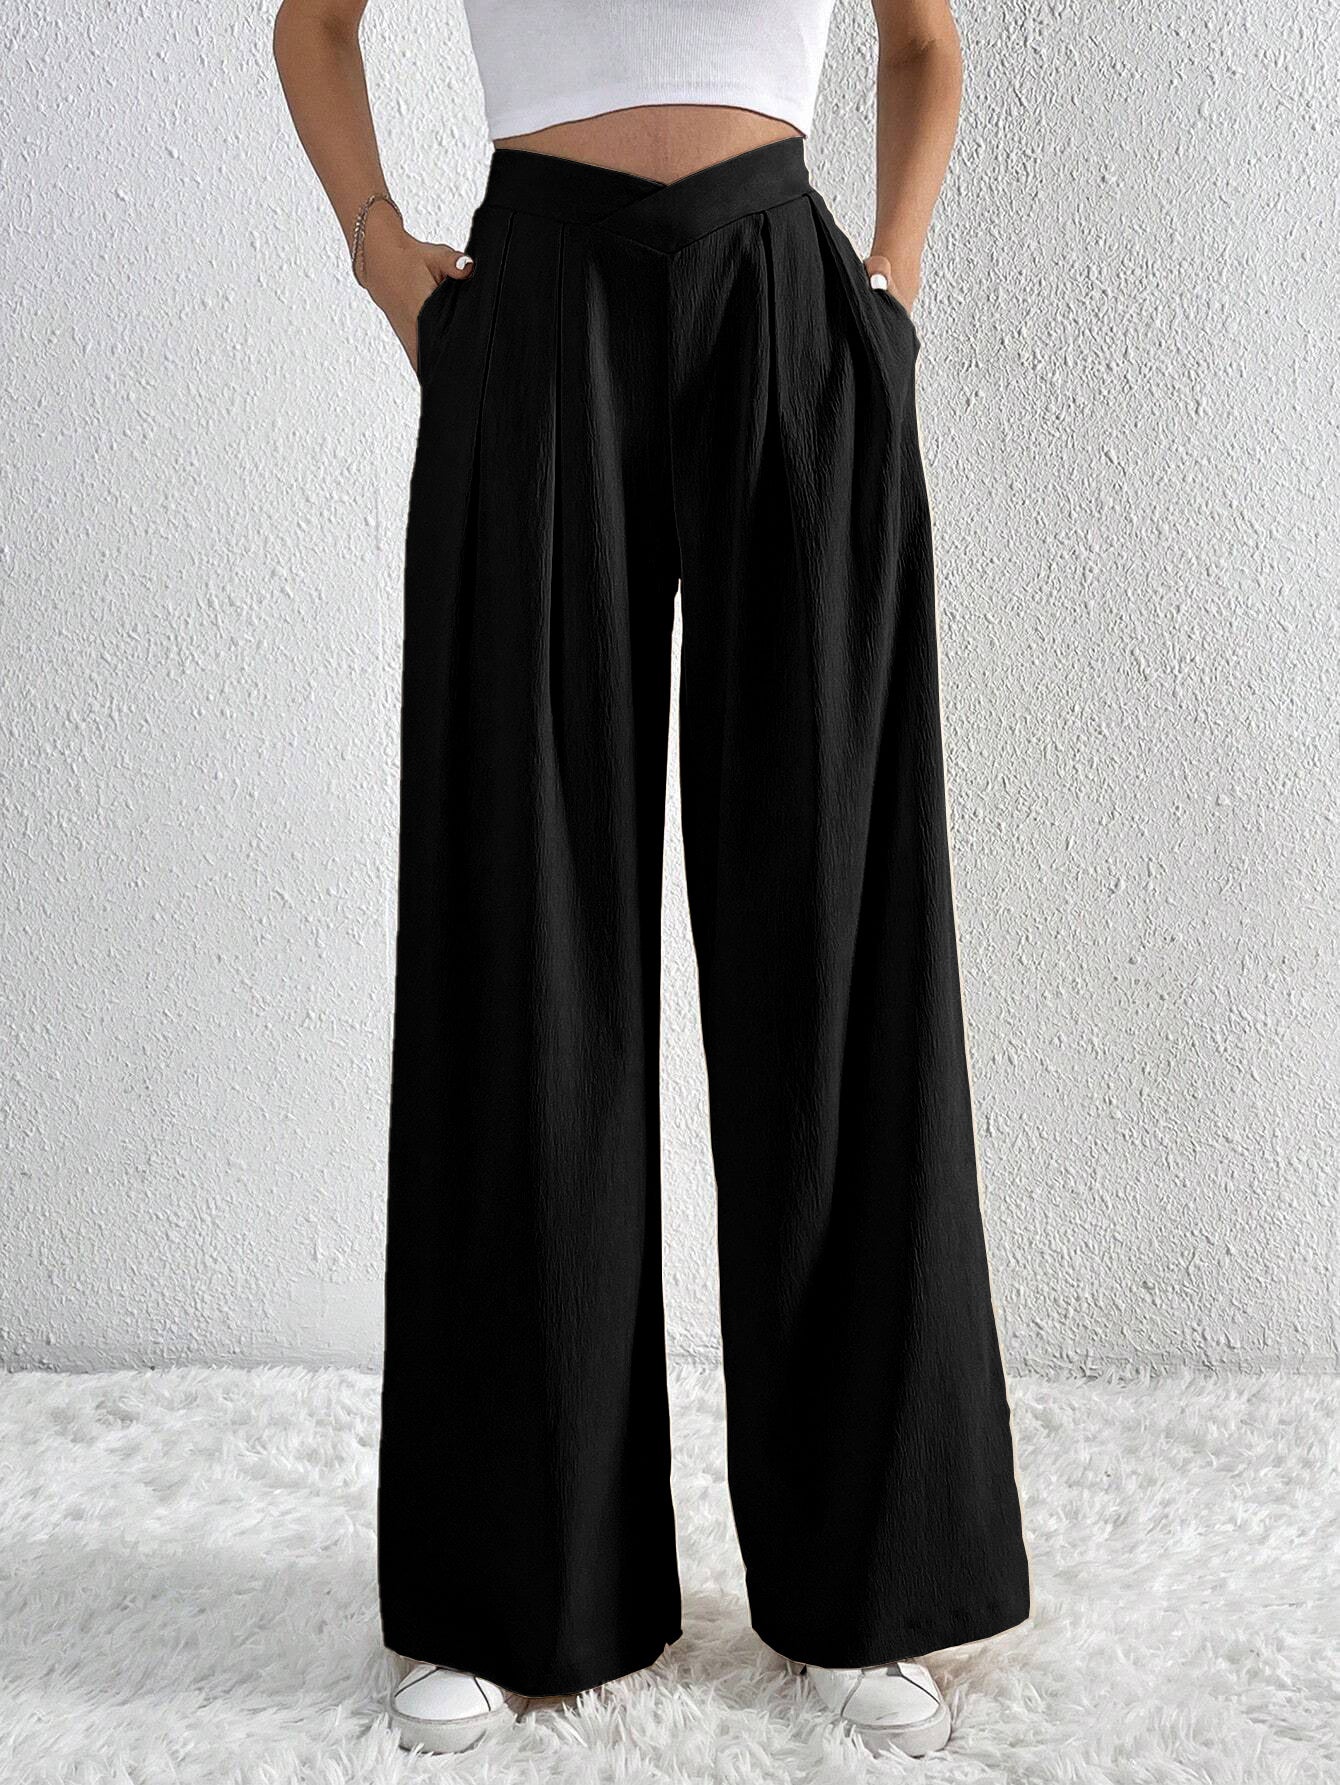 Women's Casual Loose-Fit Wide-Leg Trousers